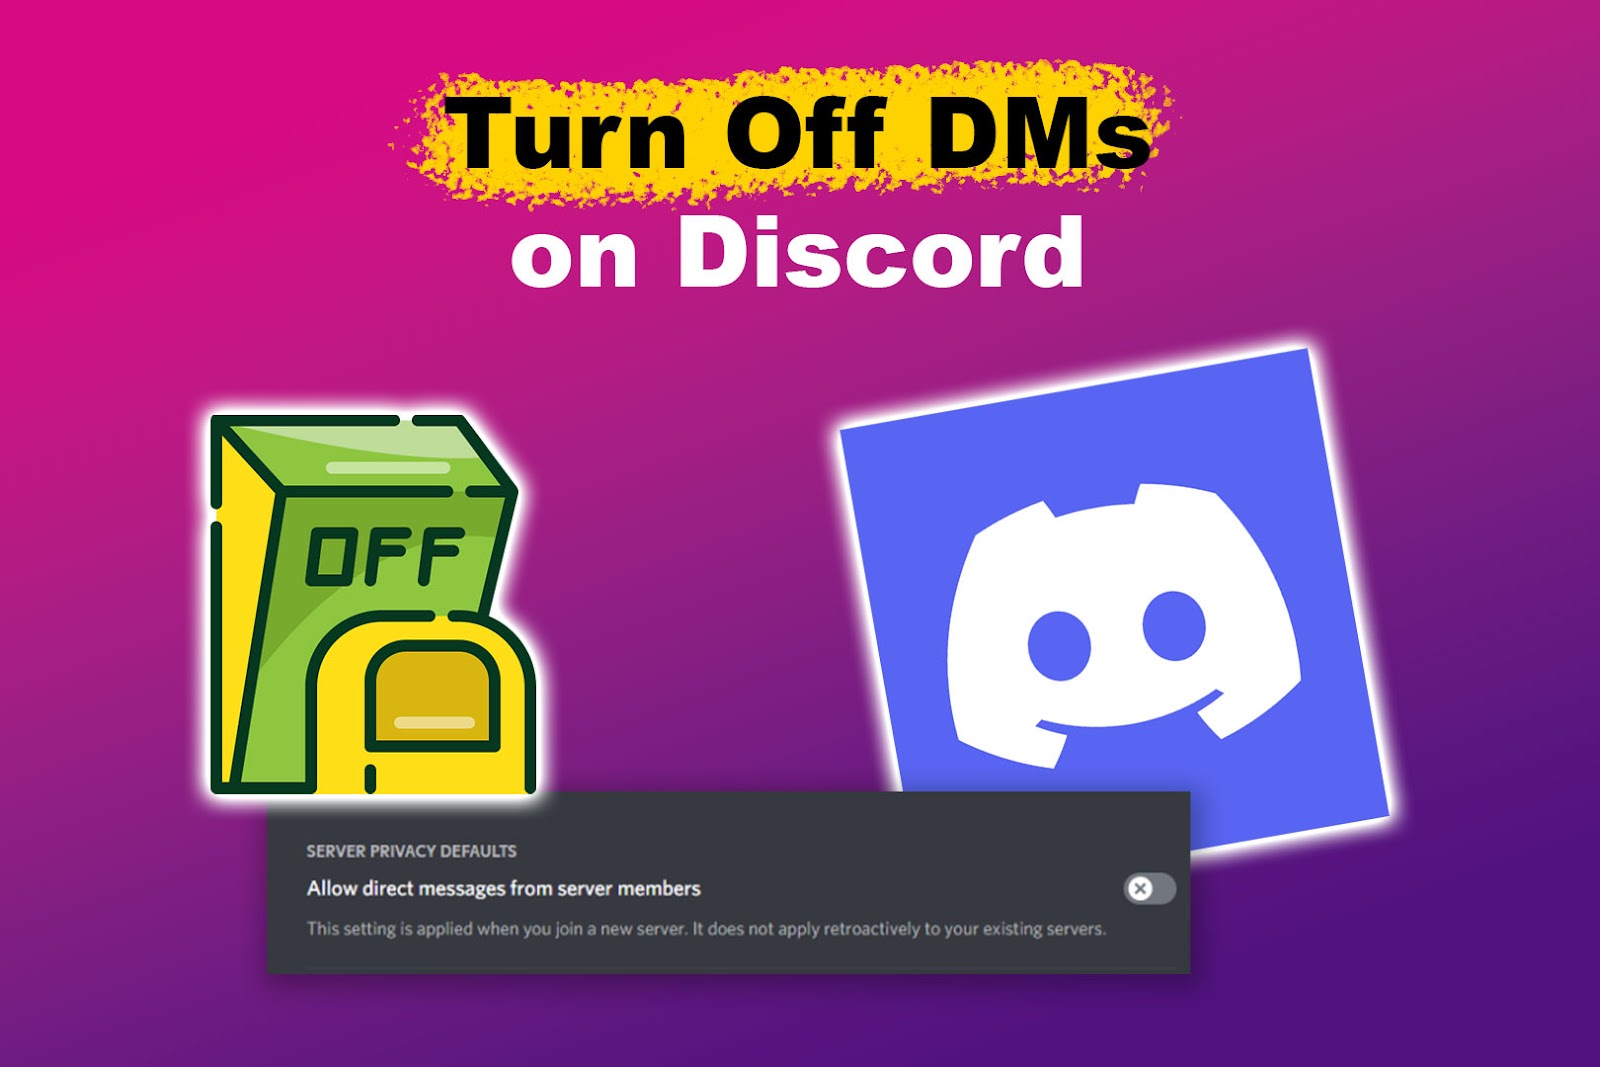 How To Turn Off DMs on Discord